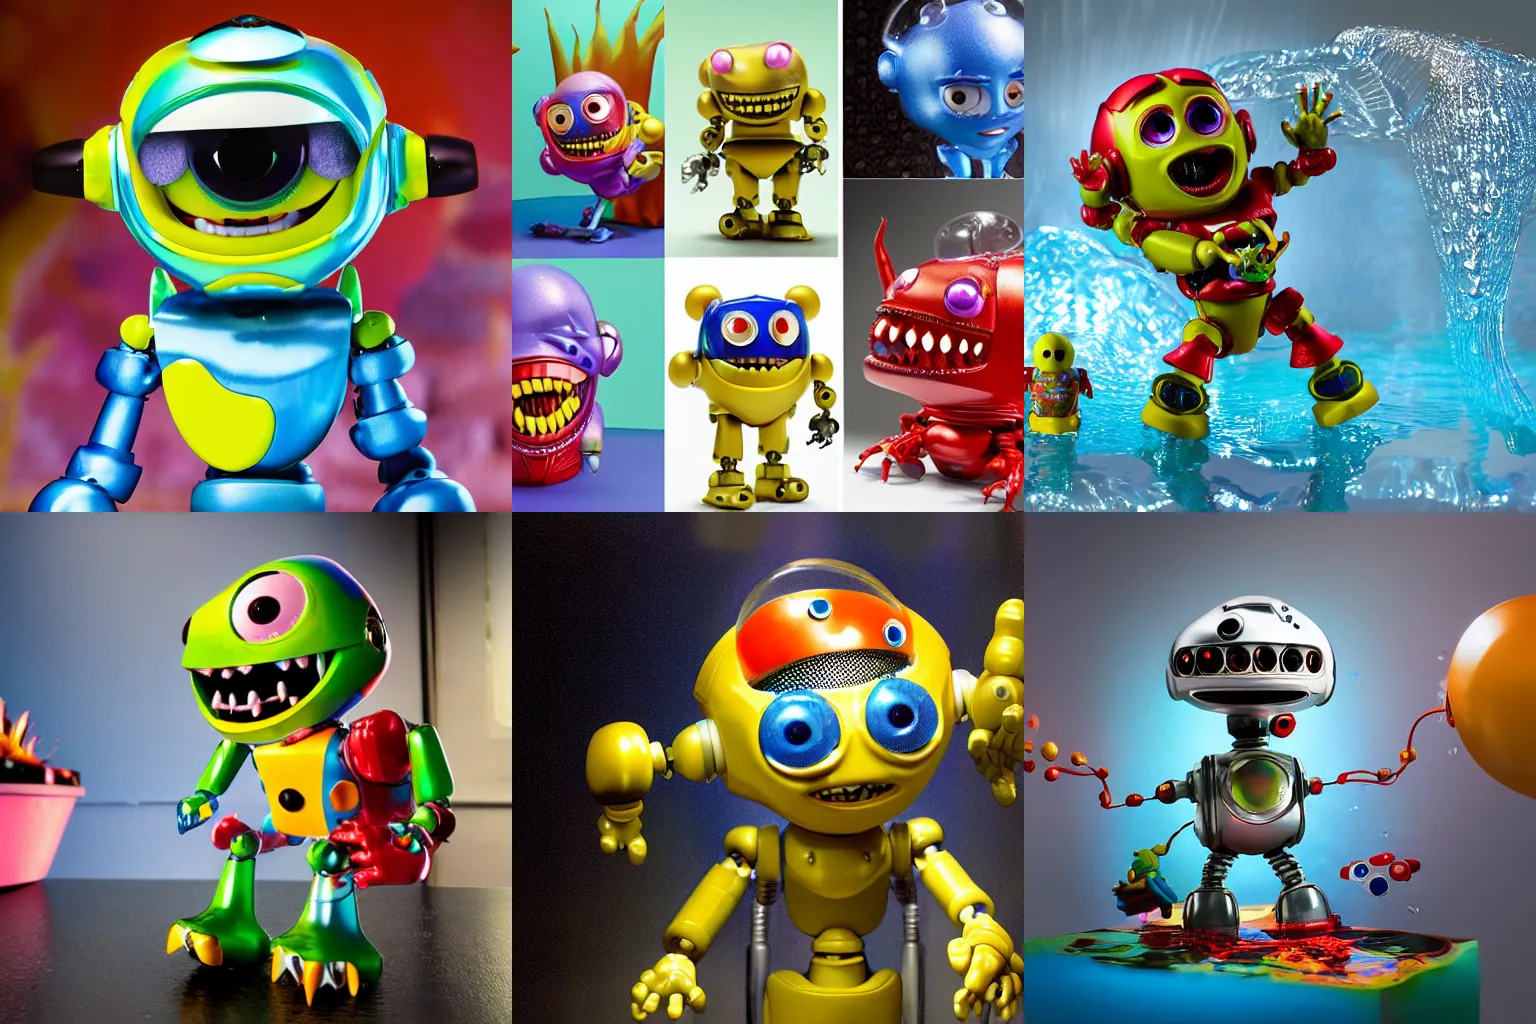 Prompt: crazy miniature toy Figure Robot monster 8K, by pixar, by dreamworks, in a Studio hollow, water drops, by jeff koons, by david lachapelle